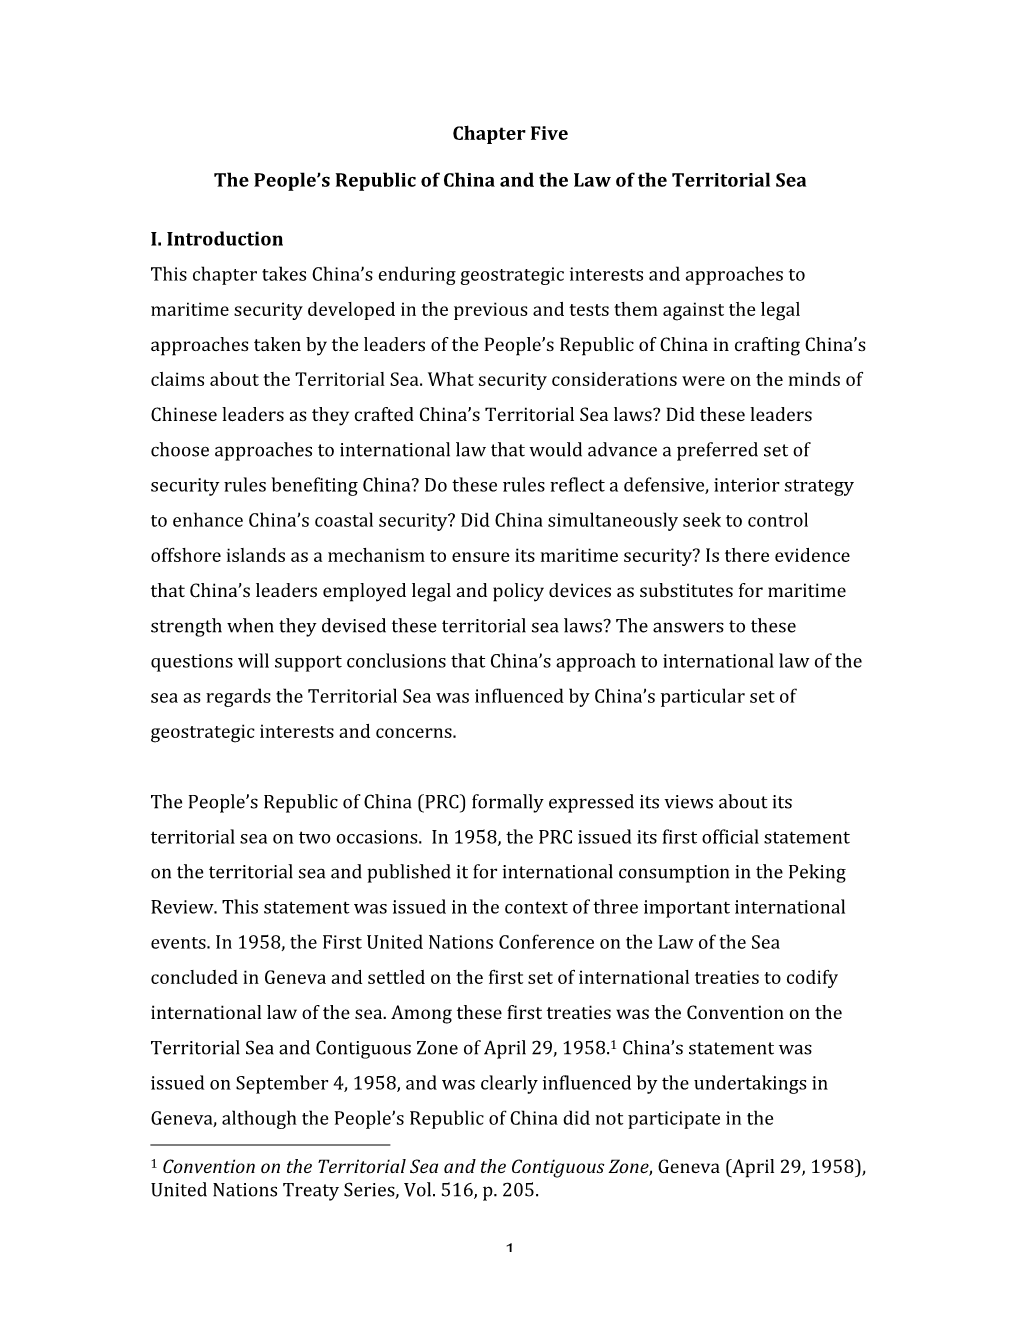 1 Chapter Five the People's Republic of China and the Law of the Territo